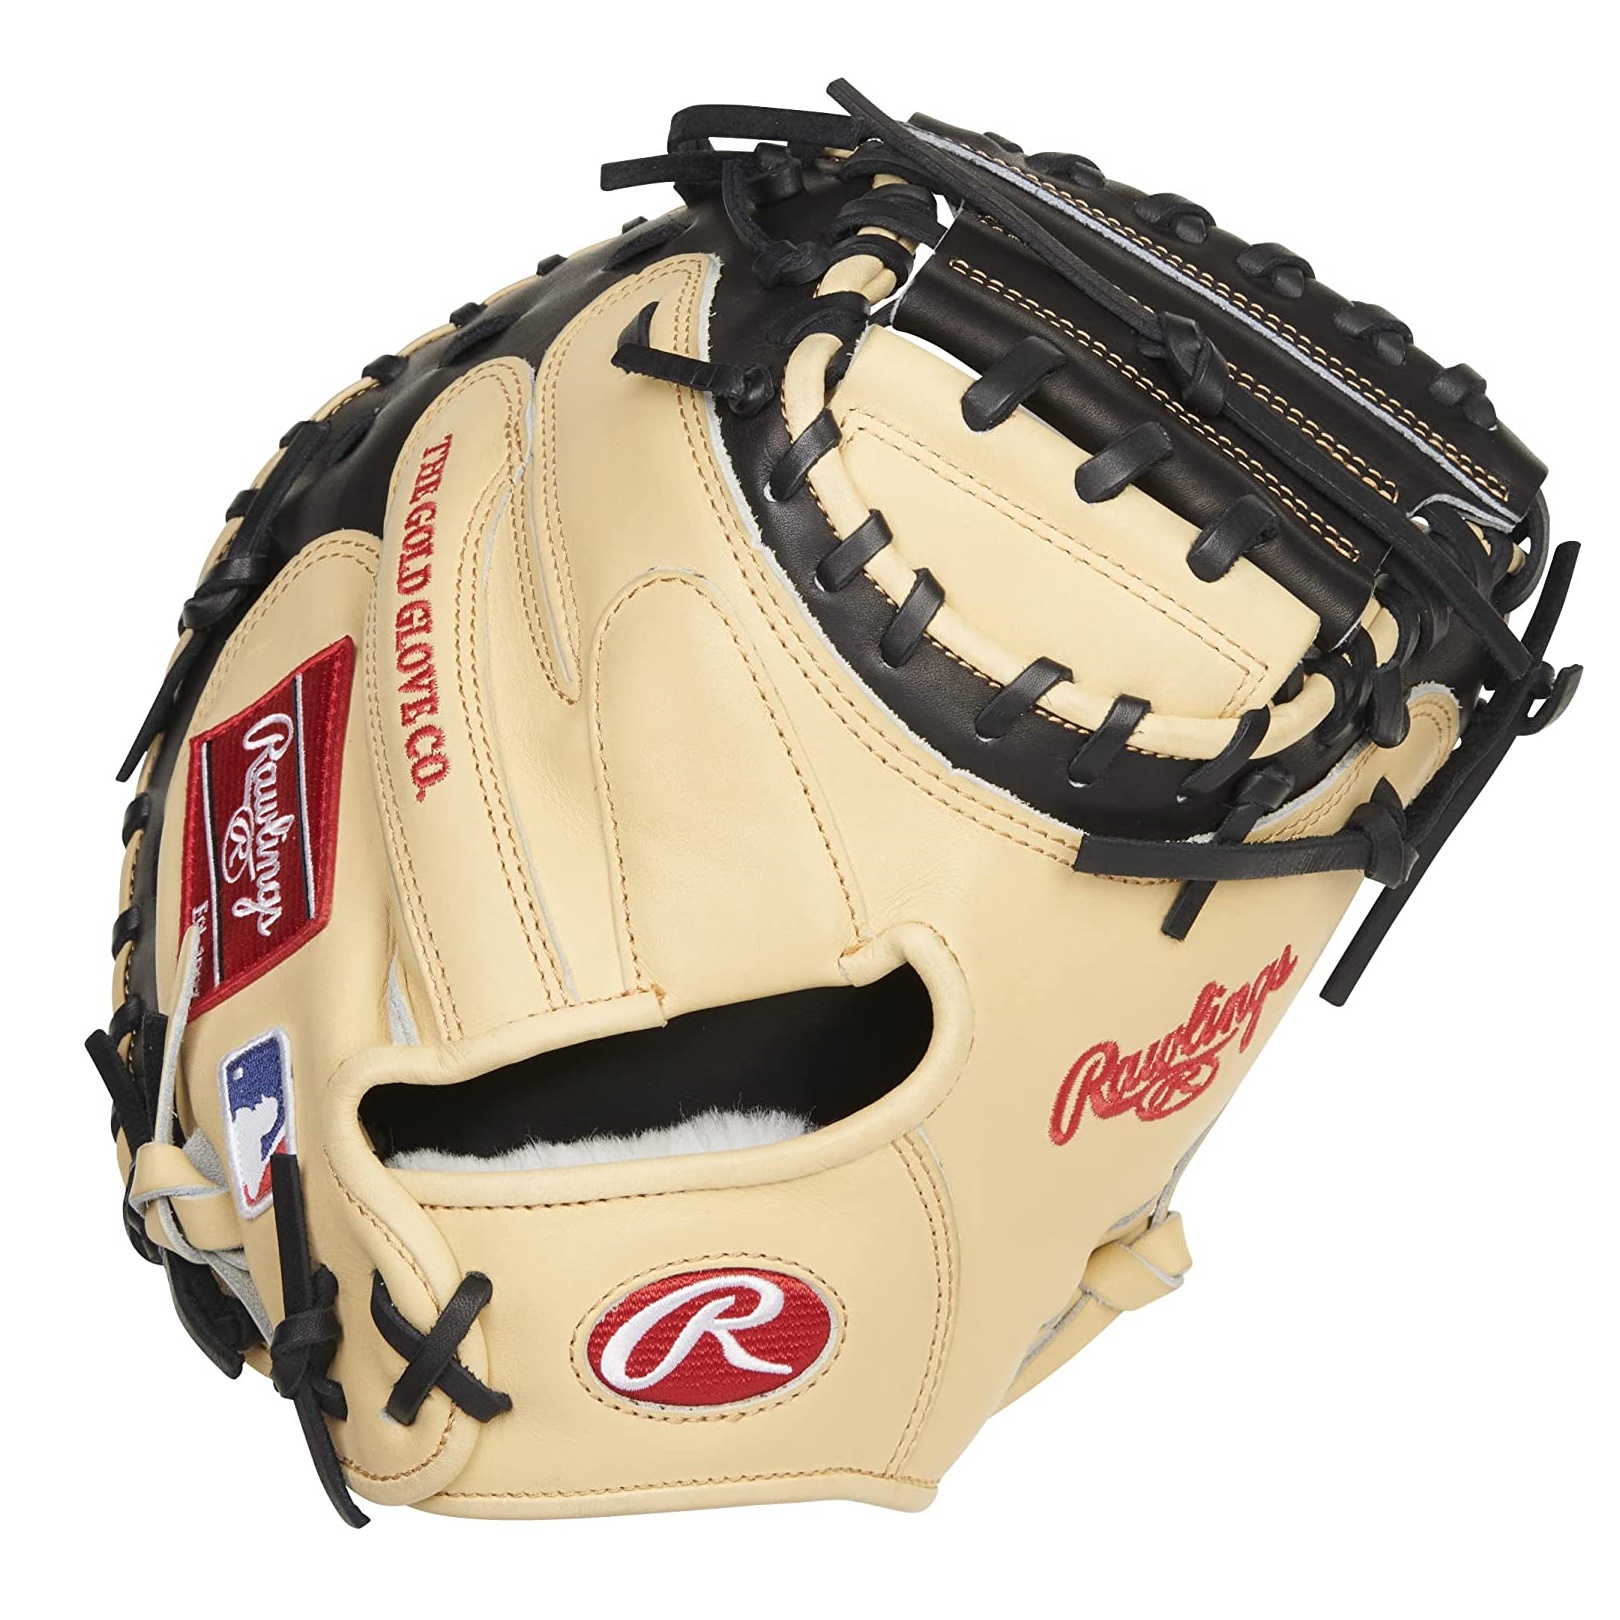 Measuring at a generous 34.00 inches, this glove features a break-in ratio of 60% player, 40% factory for a personalized fit. The striking colorway of Tan, Black, and Red is elevated by the luxurious Deer touch Finger Back Lining. The conventional open back, full-grain kip leather, and padded thumb loop ensure a comfortable fit and long-lasting structure. The Pittards Sheepskin Palm Lining adds an extra layer of comfort, while the one-piece solid web and professional padding aid in pocket formation and shape retention. The Tennessee Tanning Rawhide Leather Laces provide additional structure, durability, and strength to this top-of-the-line baseball glove. Rawlings Pro Preferred gloves set the bar for excellence in premium baseball gloves. Experience the superior quality for yourself with this 34-inch catcher's mitt made of smooth, premium kip leather for optimal performance and longevity. The wool padding helps form and retain the glove's pocket, while the interior lining of Pittards sheepskin wicks away moisture and keeps your hand cool and comfortable during intense games.    Fit: Pro     Level: Adult     Lining: Pittards Sheep Skin     Padding: 100% Wool Blend     Player Break-In: 70     Series: Pro Preferred     Shell: Kip Leather     Sport: Baseball     Throwing Hand: Right     Web: 1-Piece Solid   